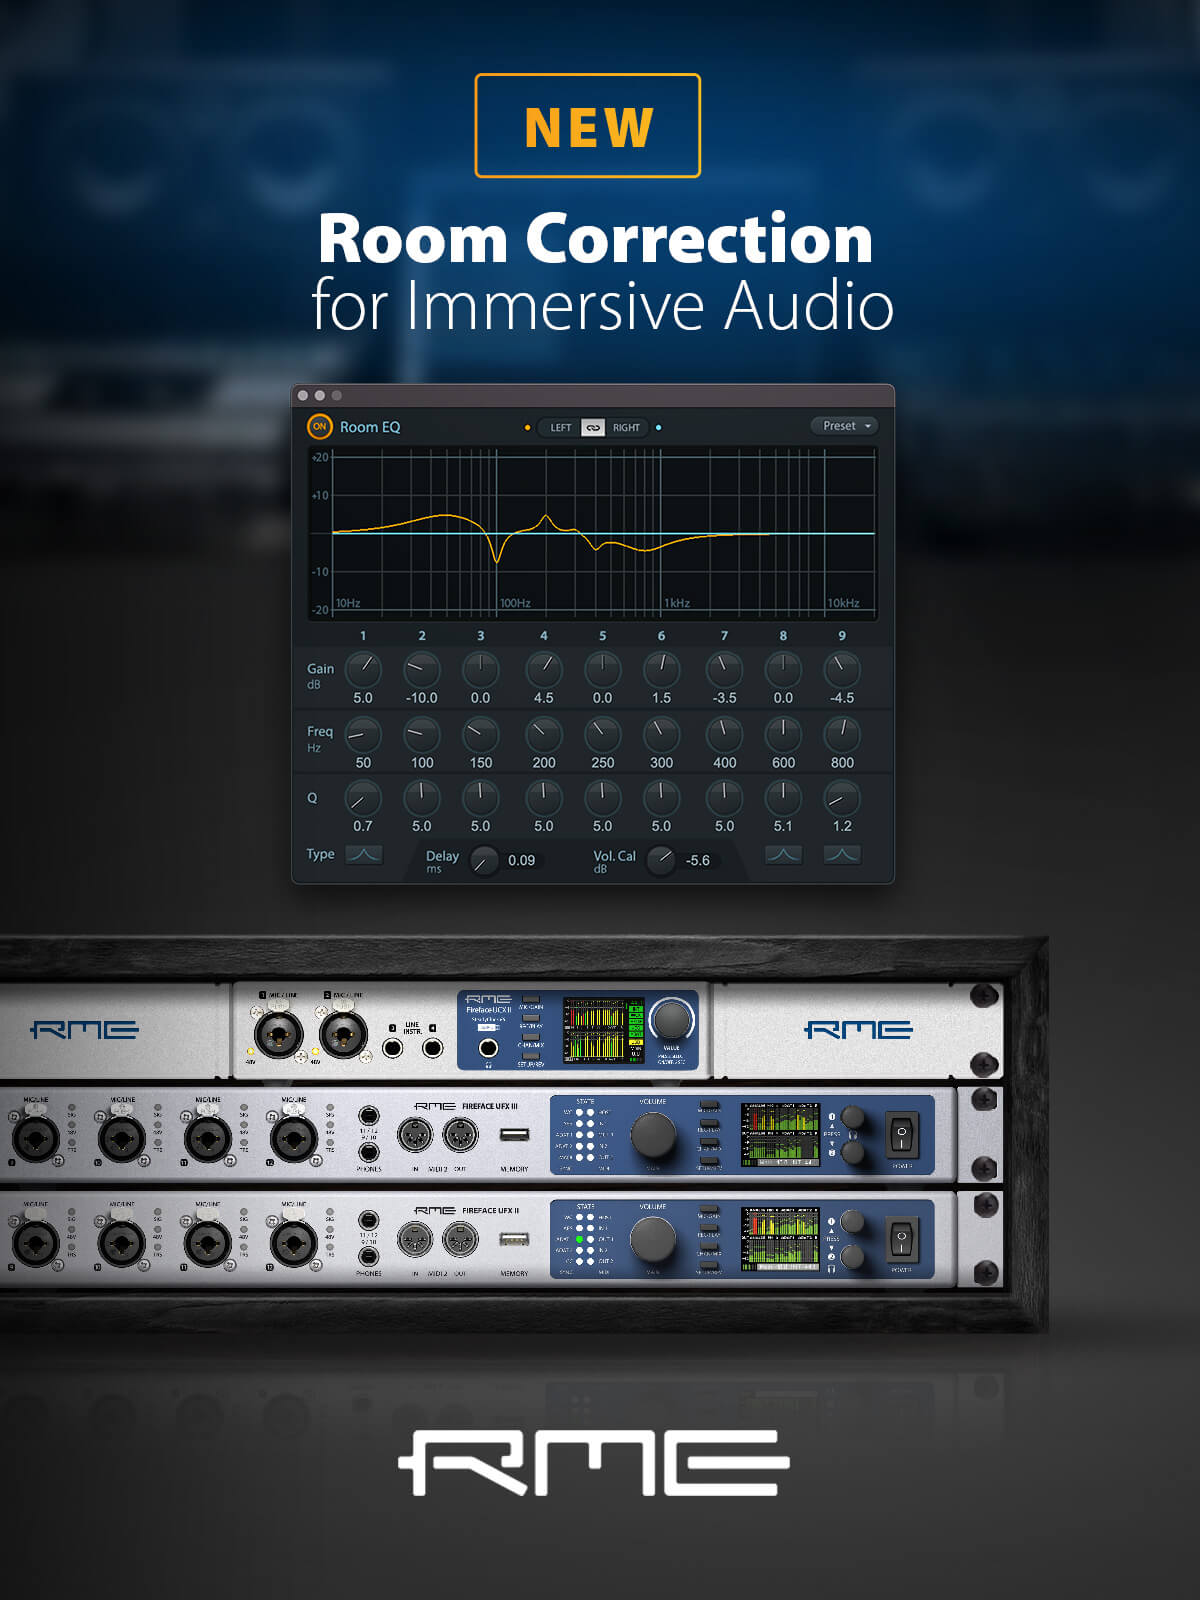 RME announced room correction for Immersive Audio f